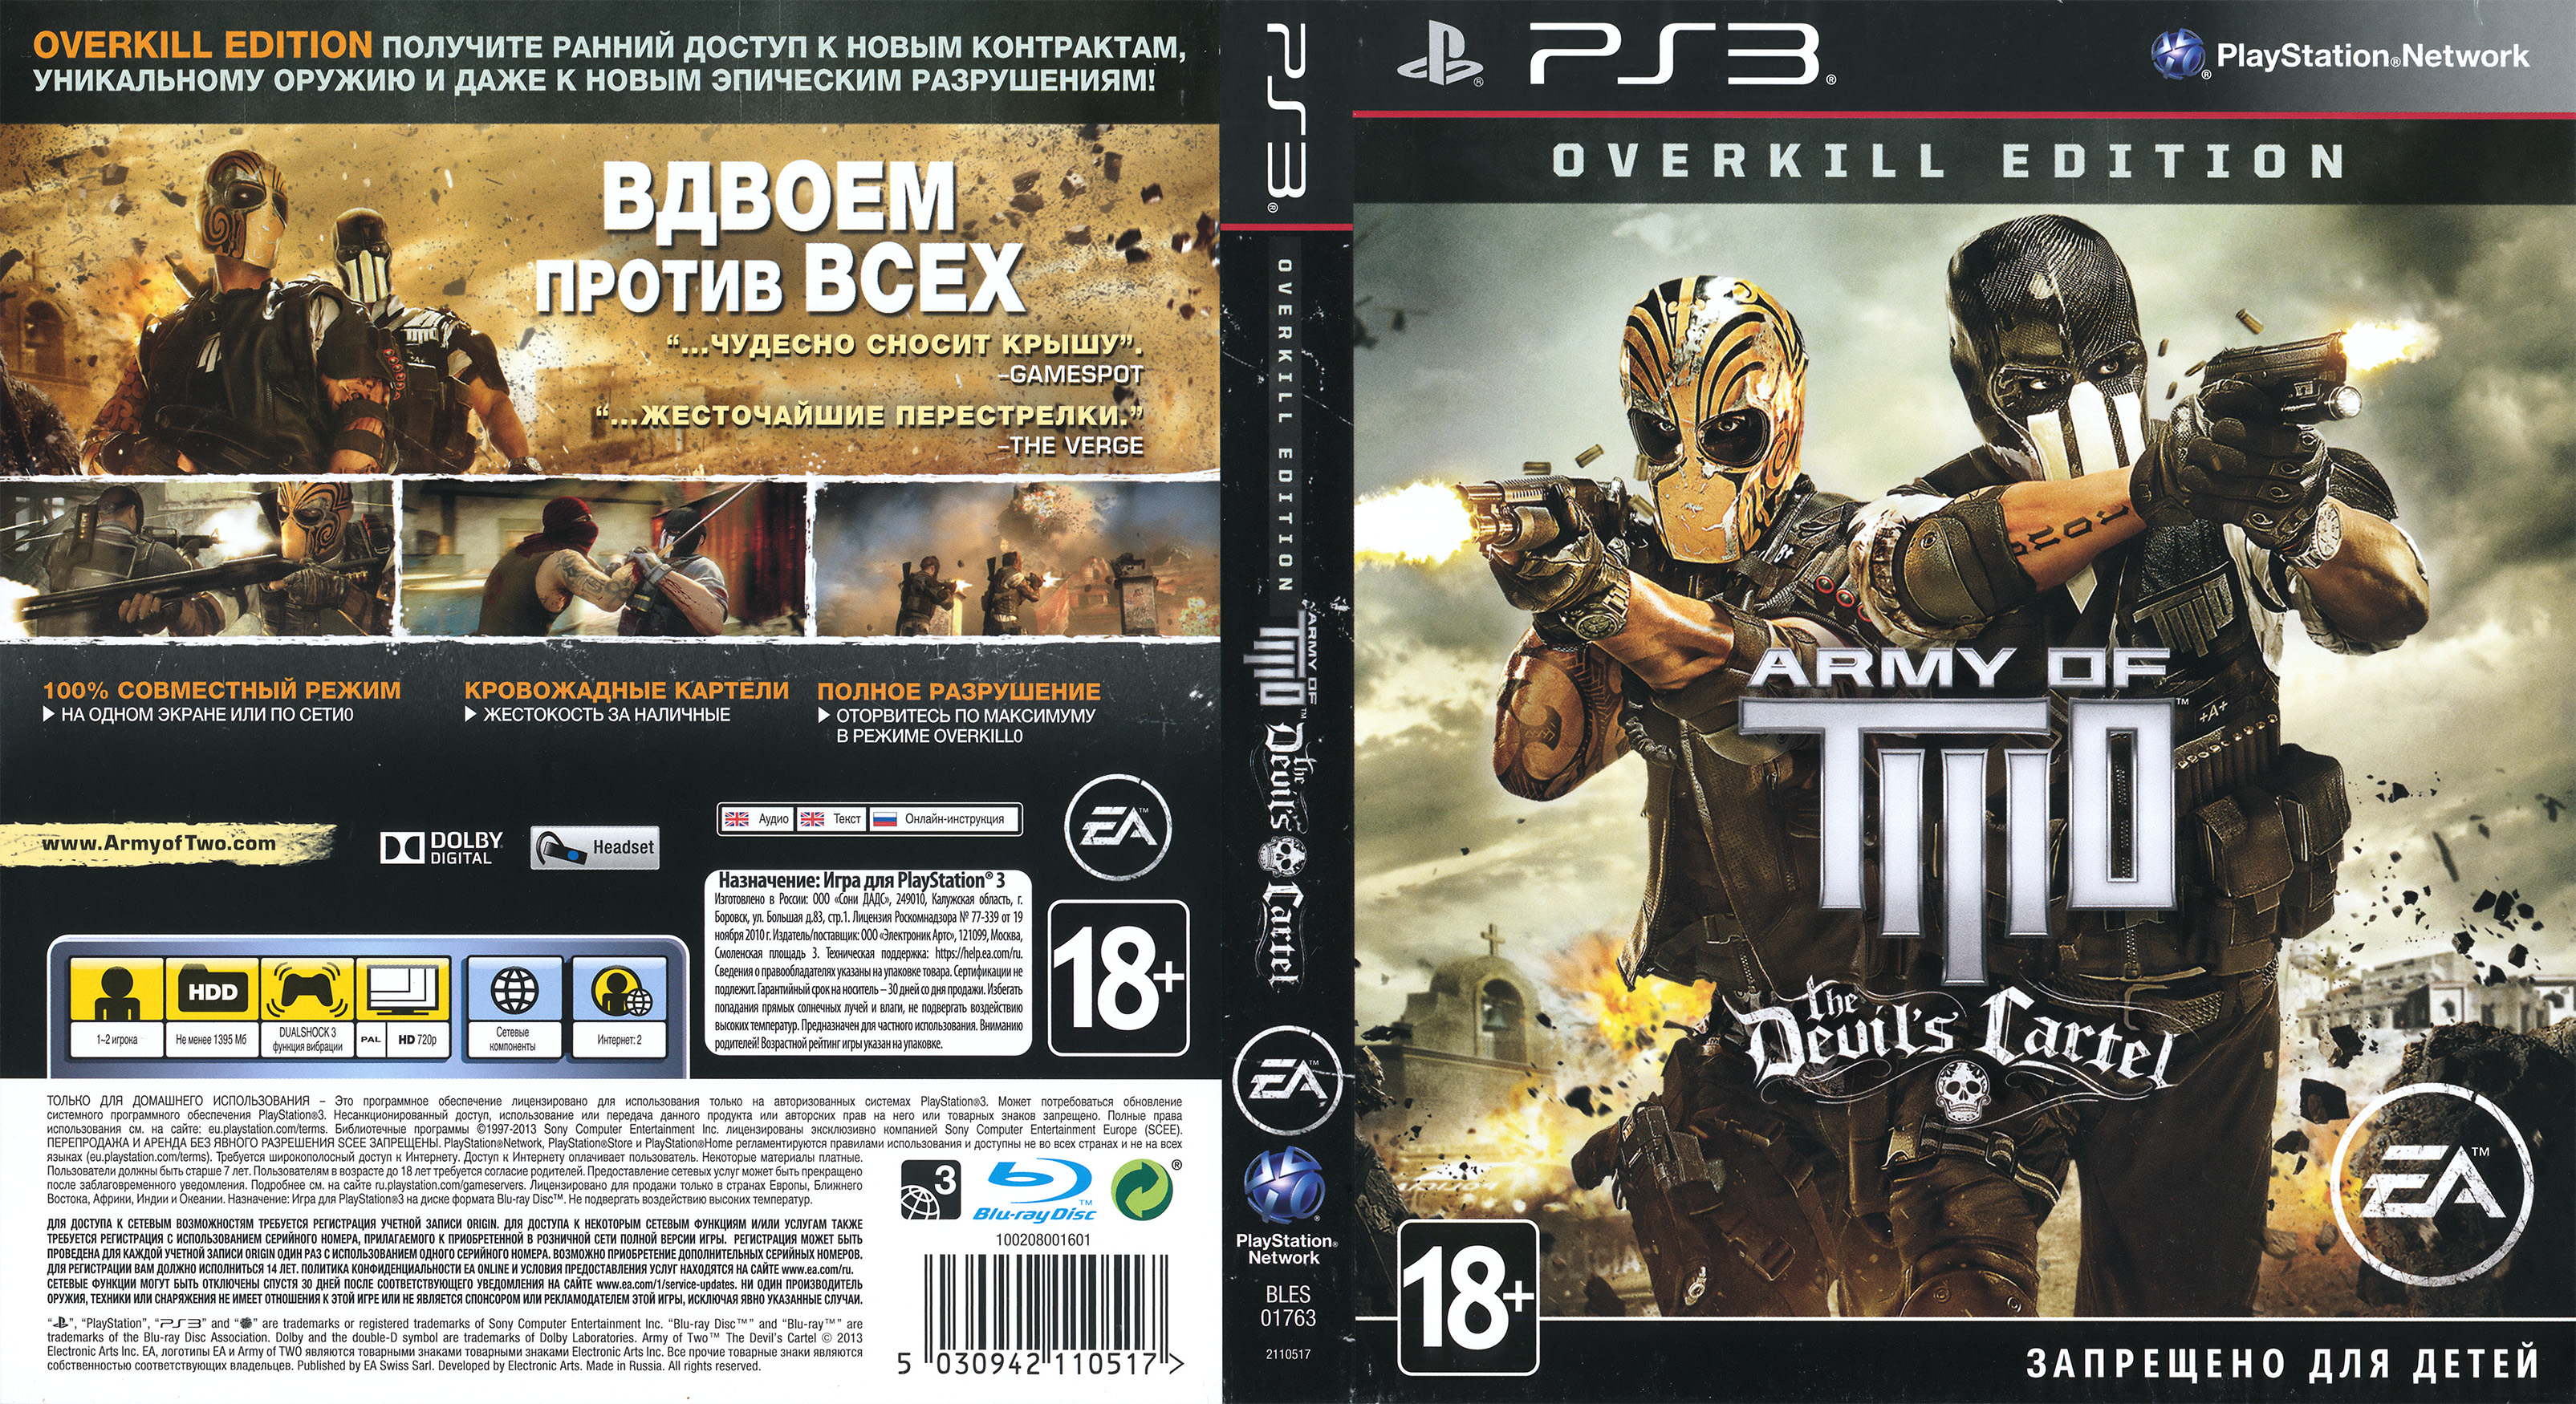 Escarpado seguro firma Army of Two: The Devil's Cartel (Overkill Edition) PS3 BLES-01763/RU Russia  — Complete Art Scans : Free Download, Borrow, and Streaming : Internet  Archive